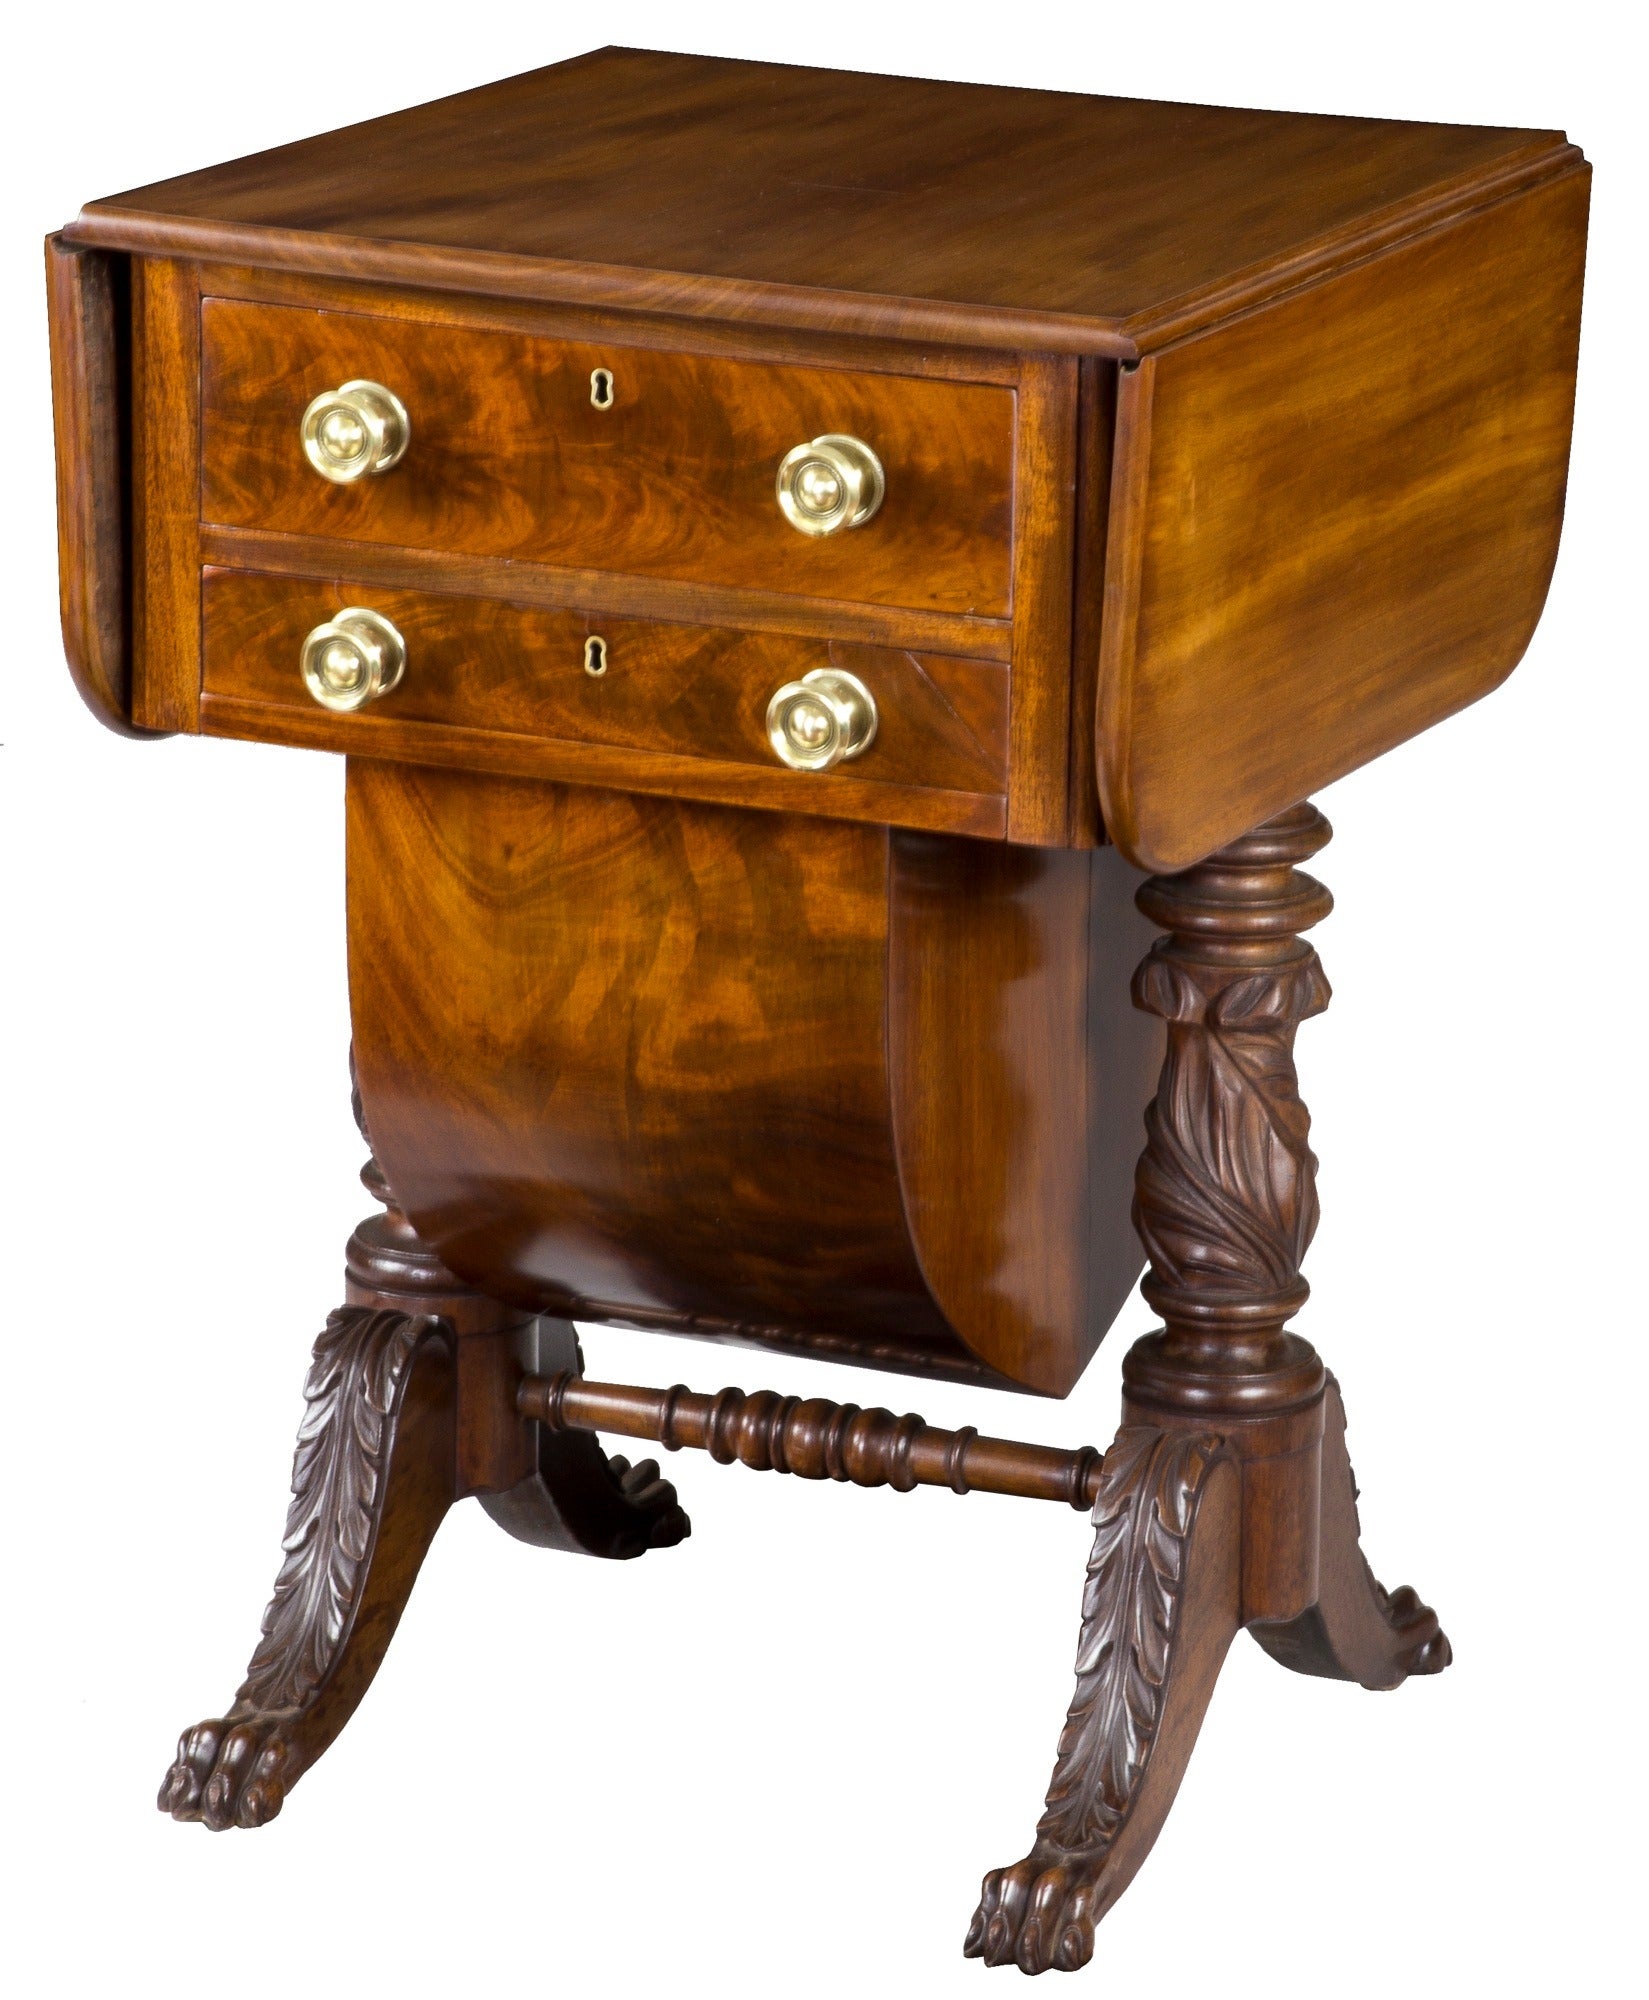 Classical Carved Mahogany Sewing Stand with Acanthus Carved Legs, circa 1820 For Sale